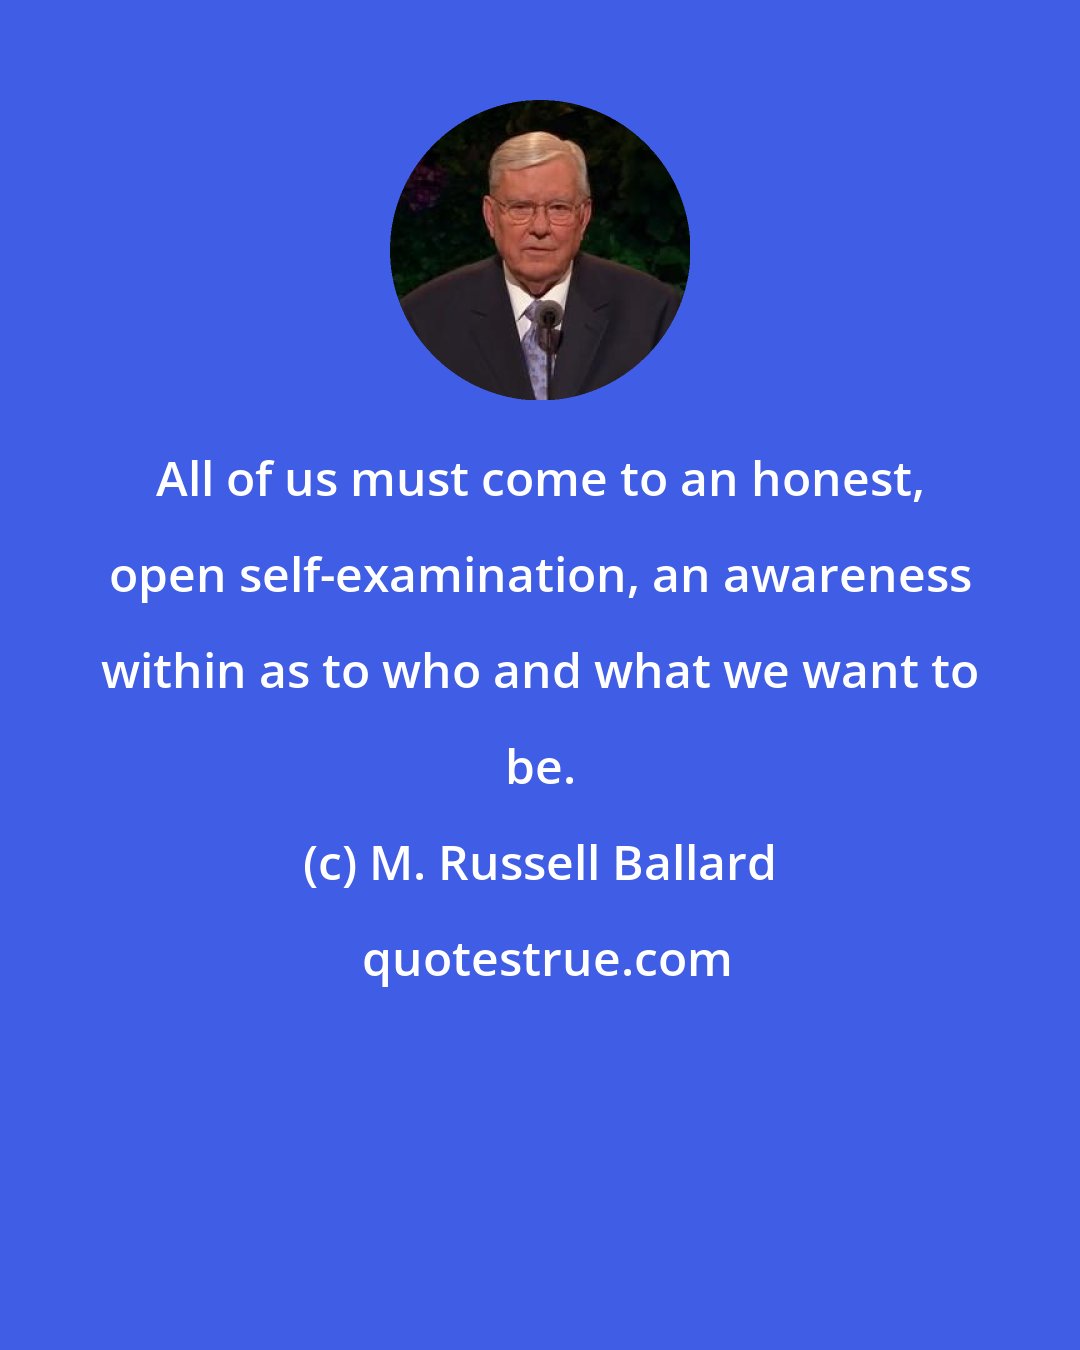 M. Russell Ballard: All of us must come to an honest, open self-examination, an awareness within as to who and what we want to be.